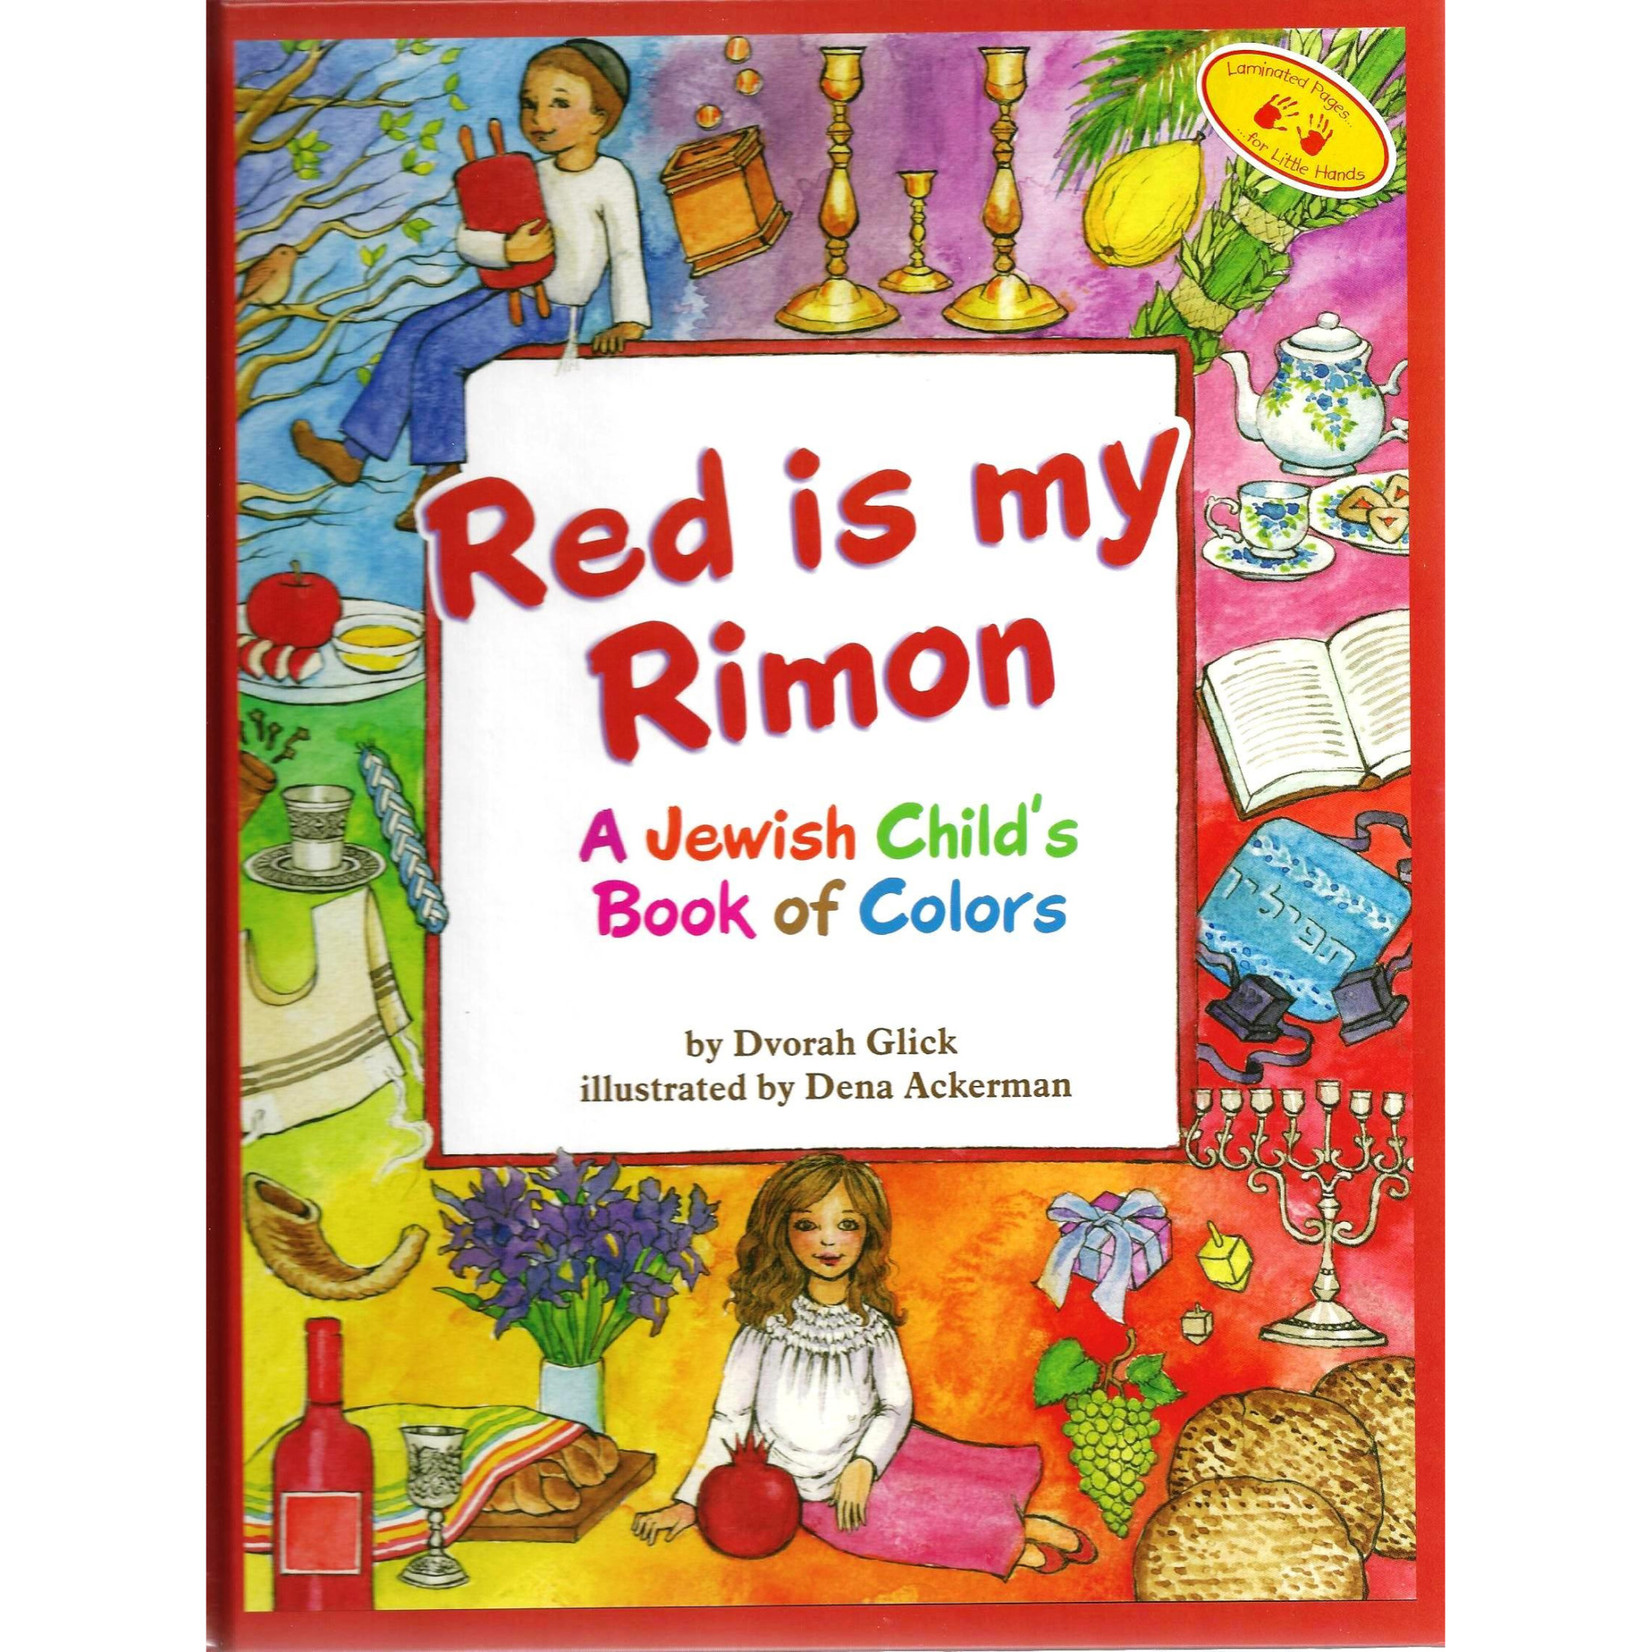 Red Rimon - A Jewish Child’s Book of Colors